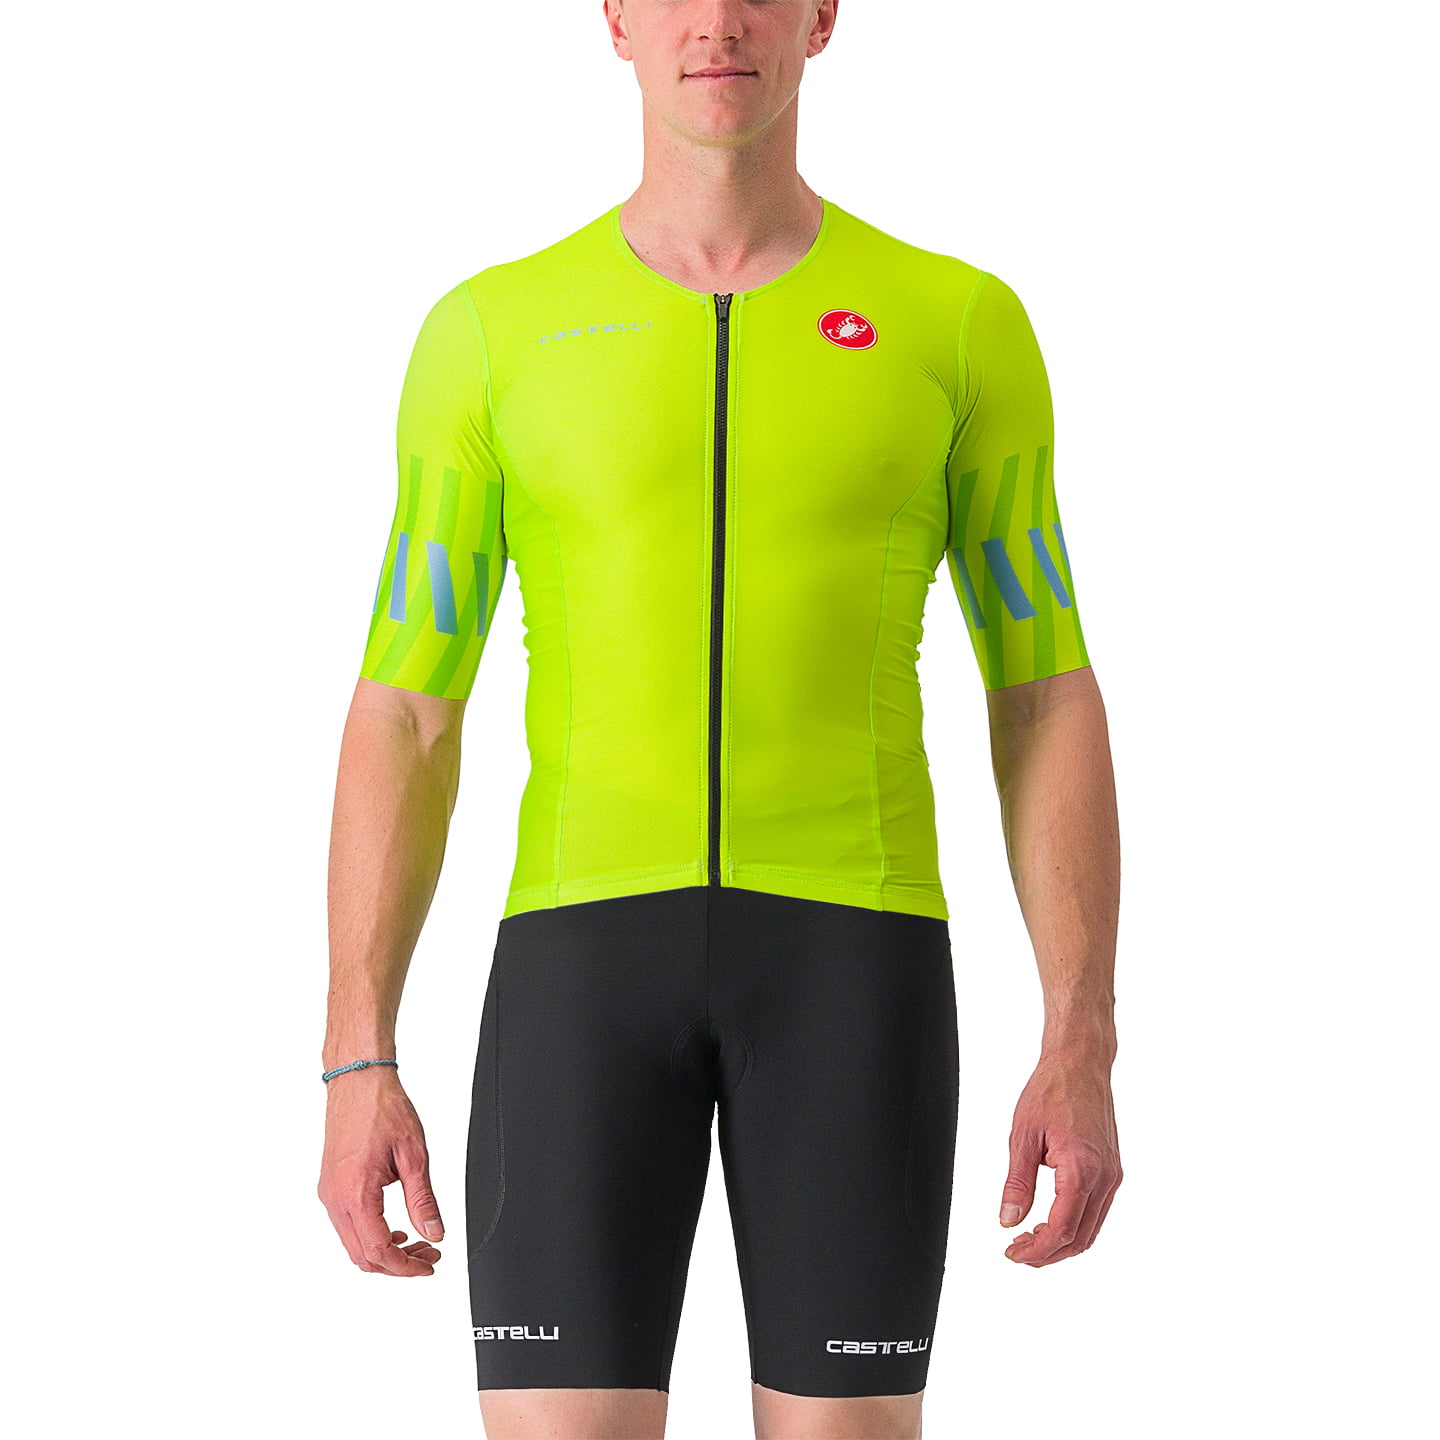 CASTELLI Free Speed 2 Set (cycling jersey + cycling shorts) Set (2 pieces), for men